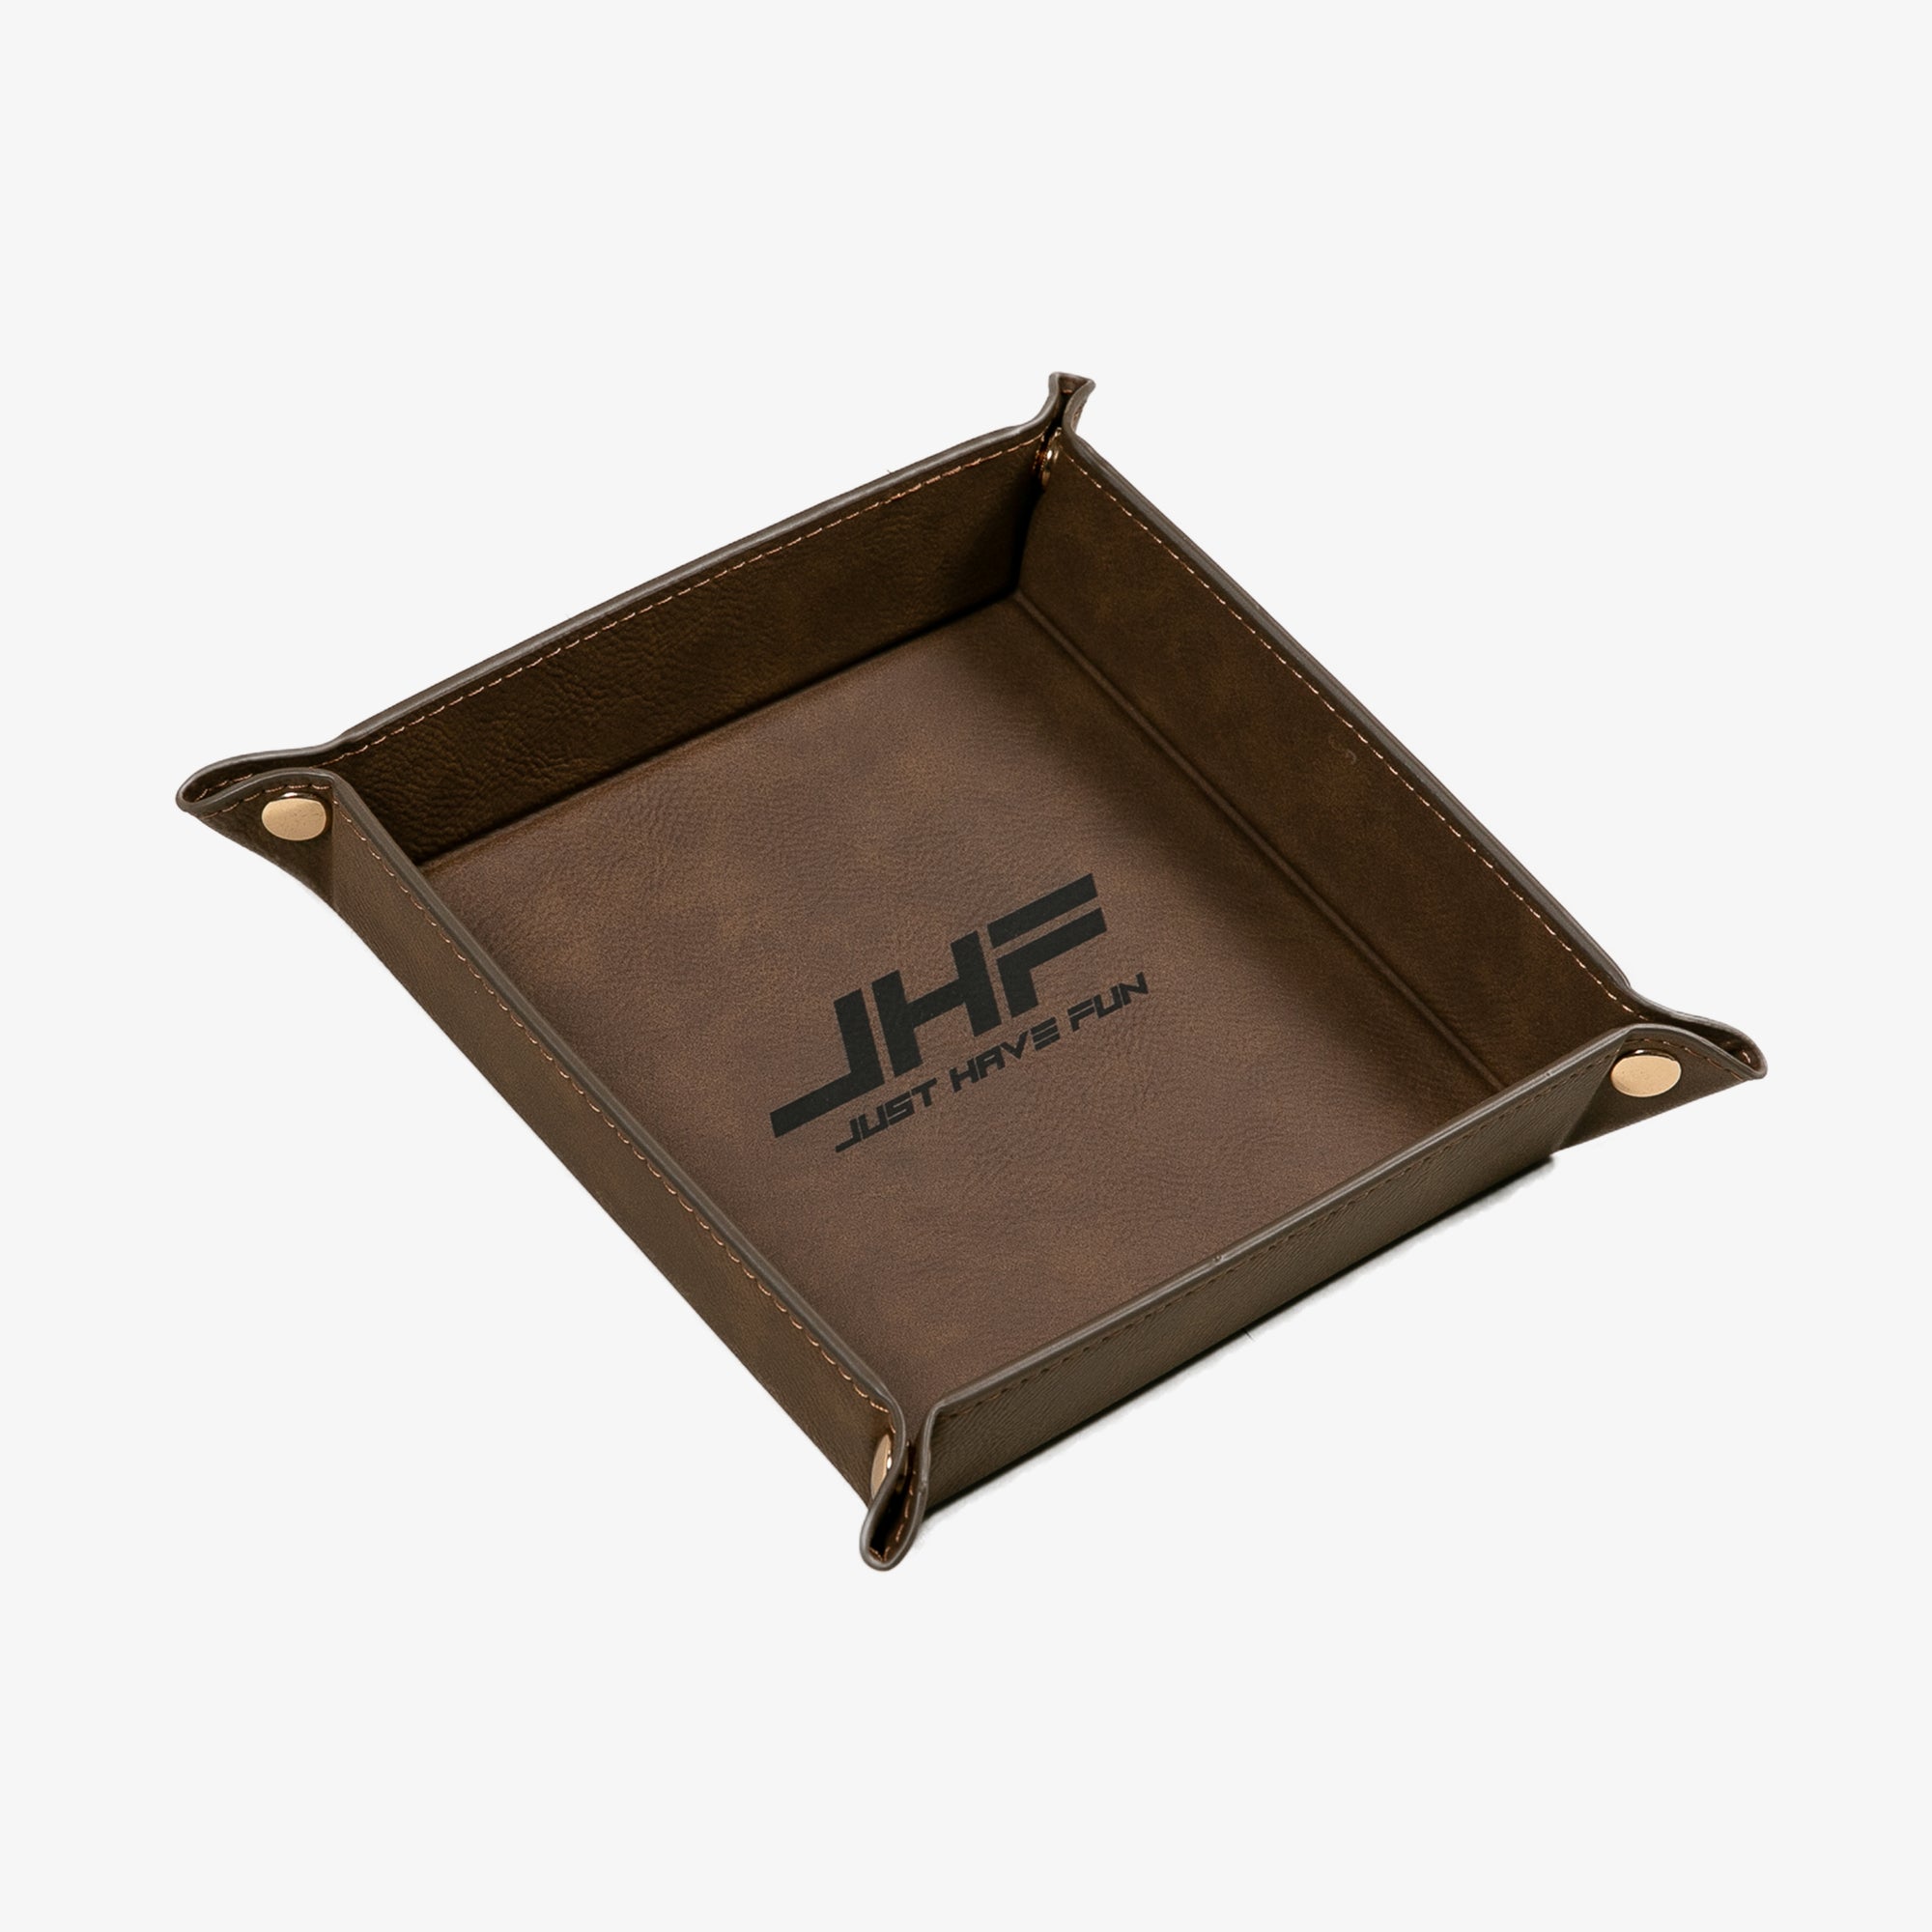 JHF leather tray